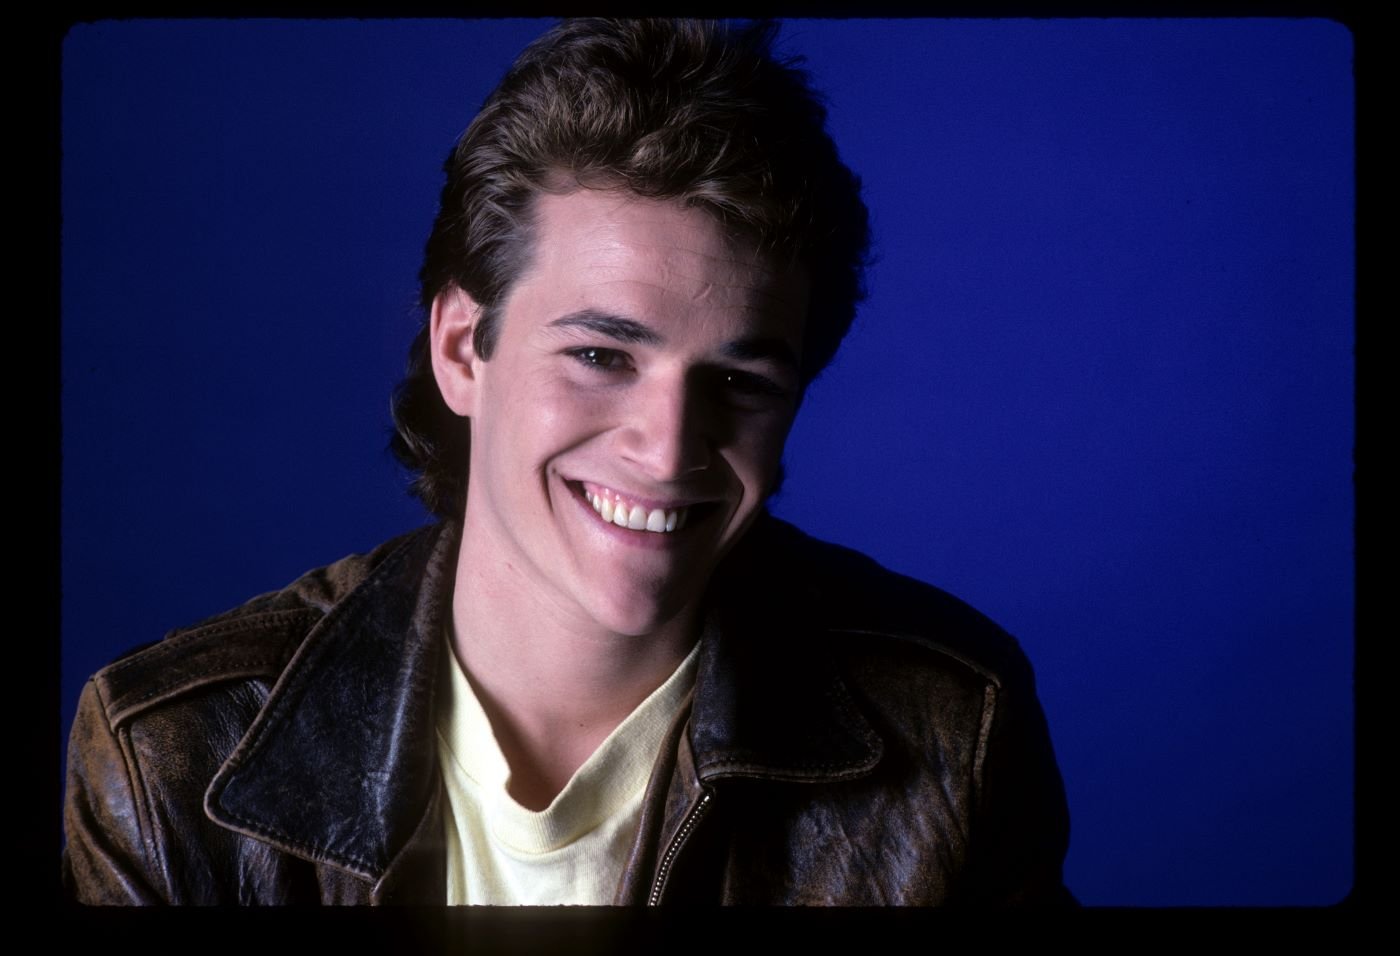 Luke Perry in a black leather jacket with a cream undershirt in front of a solid blue background.